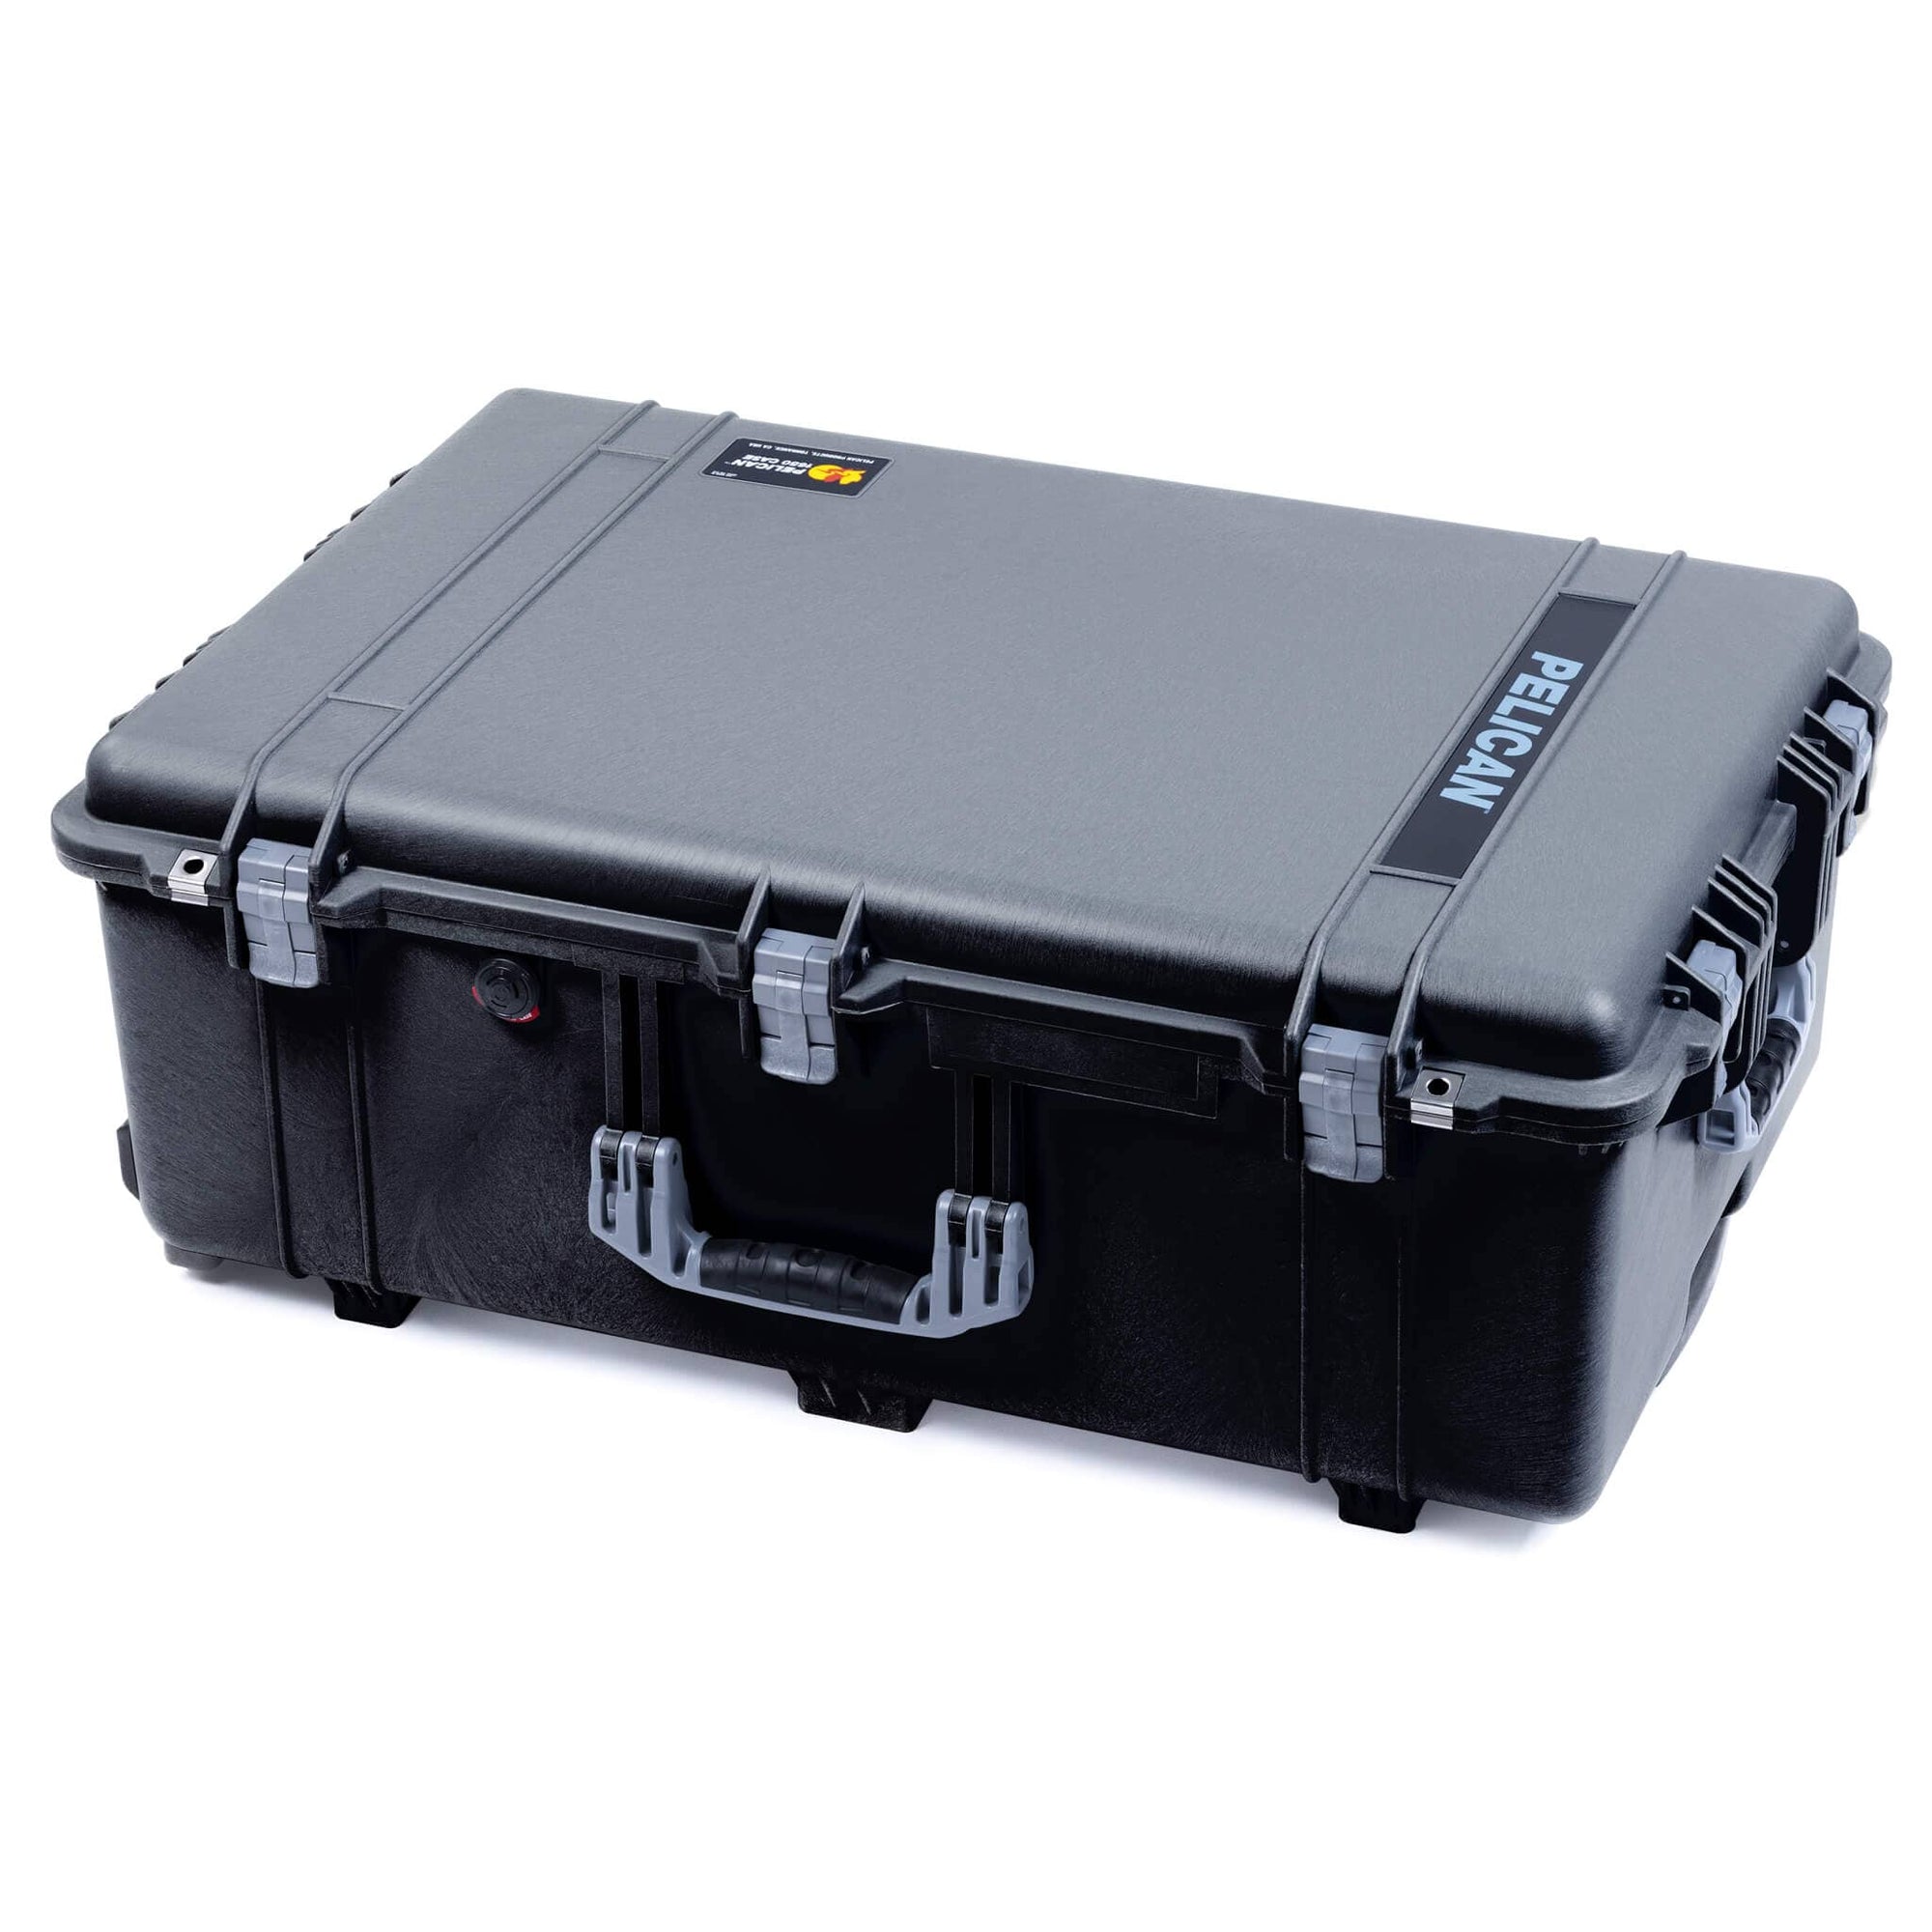 Pelican 1650 Case, Black with Silver Handles & Latches ColorCase 